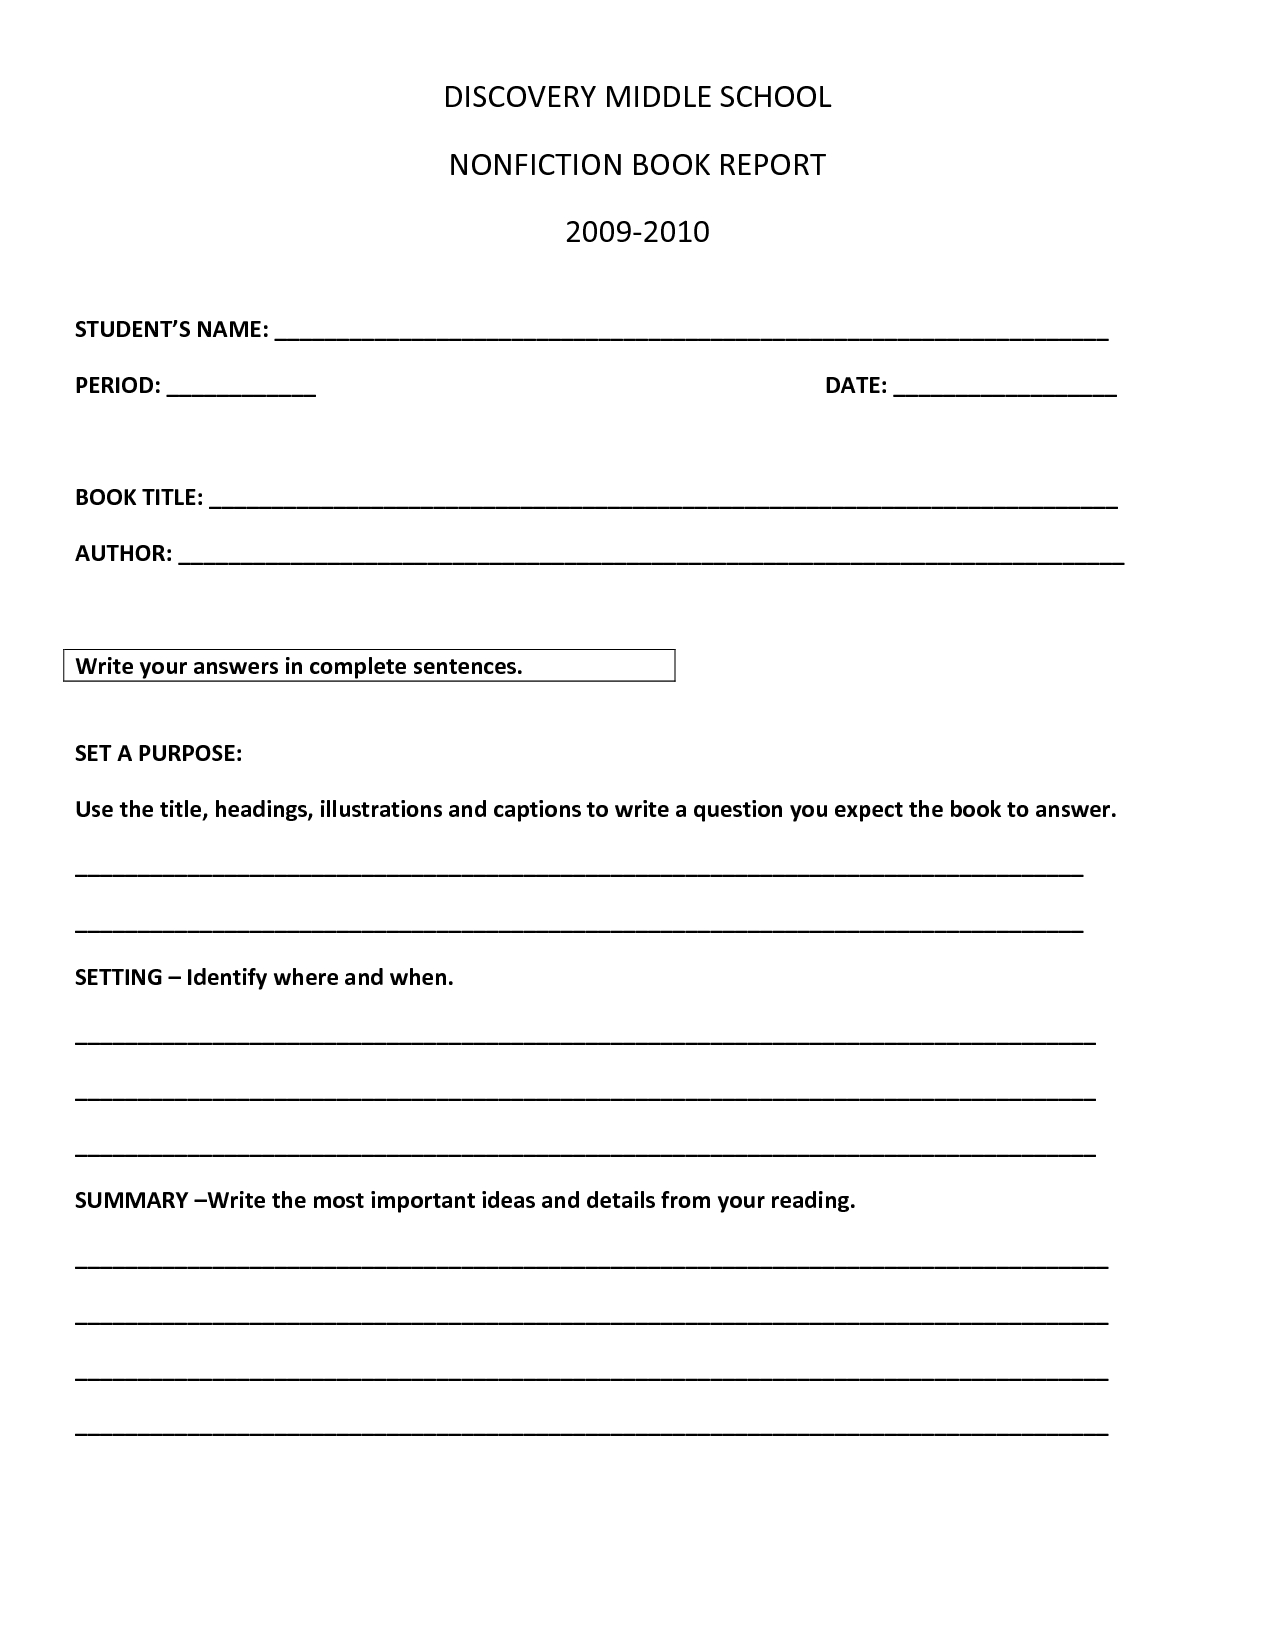 Book Report Template | Discovery Middle School Nonfiction Regarding Book Report Template High School